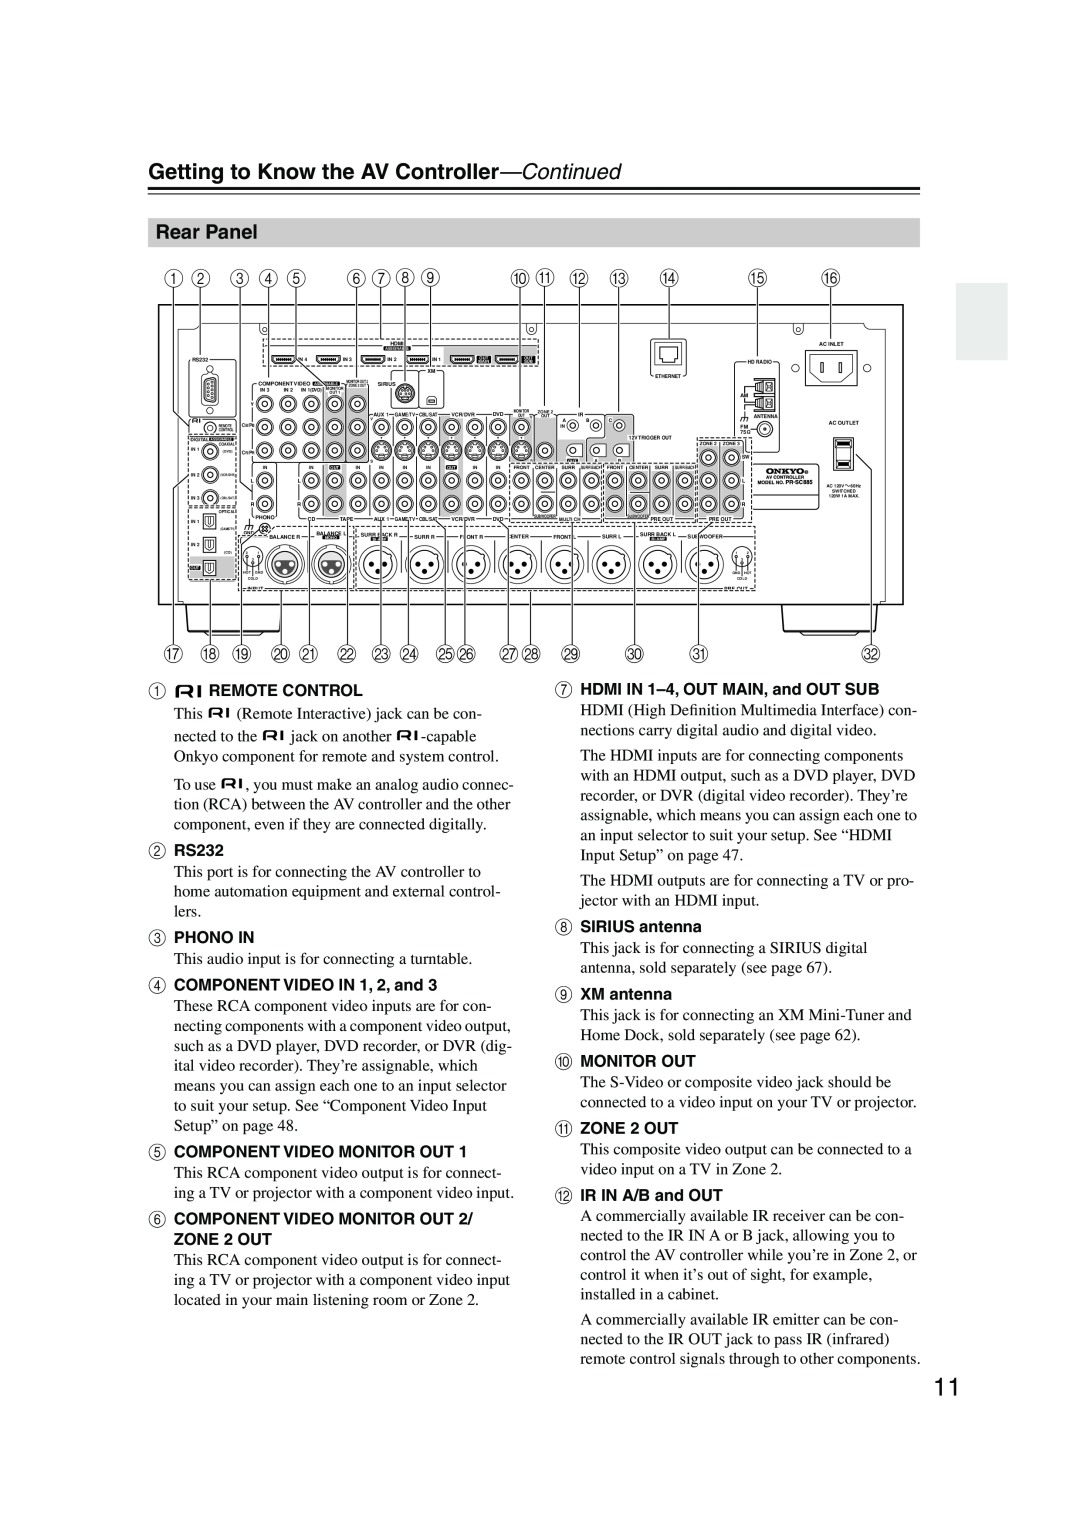 Onkyo PR-SC885 instruction manual Rear Panel, Getting to Know the AV Controller—Continued, 1 2 3 4 5 6 78, J K L M N 